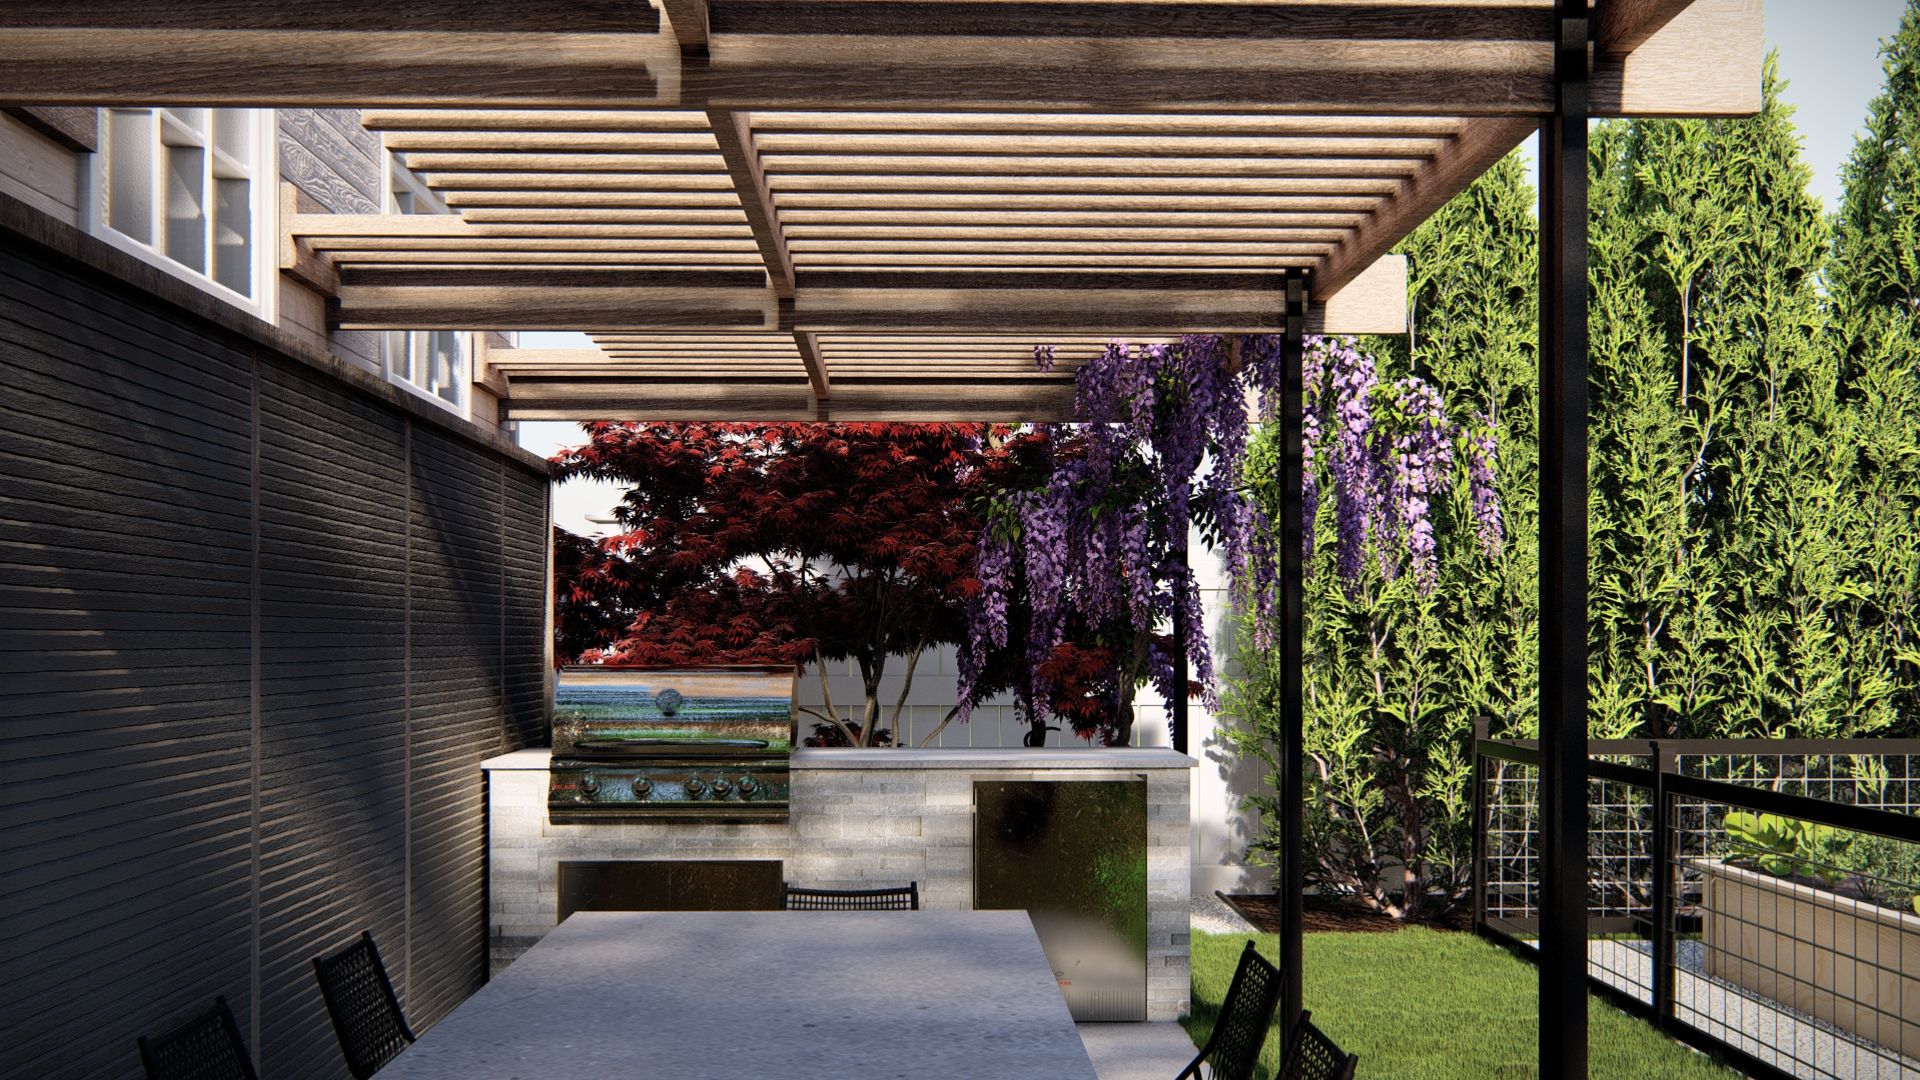 Wooden pergola with support vines attached to the home's exterior